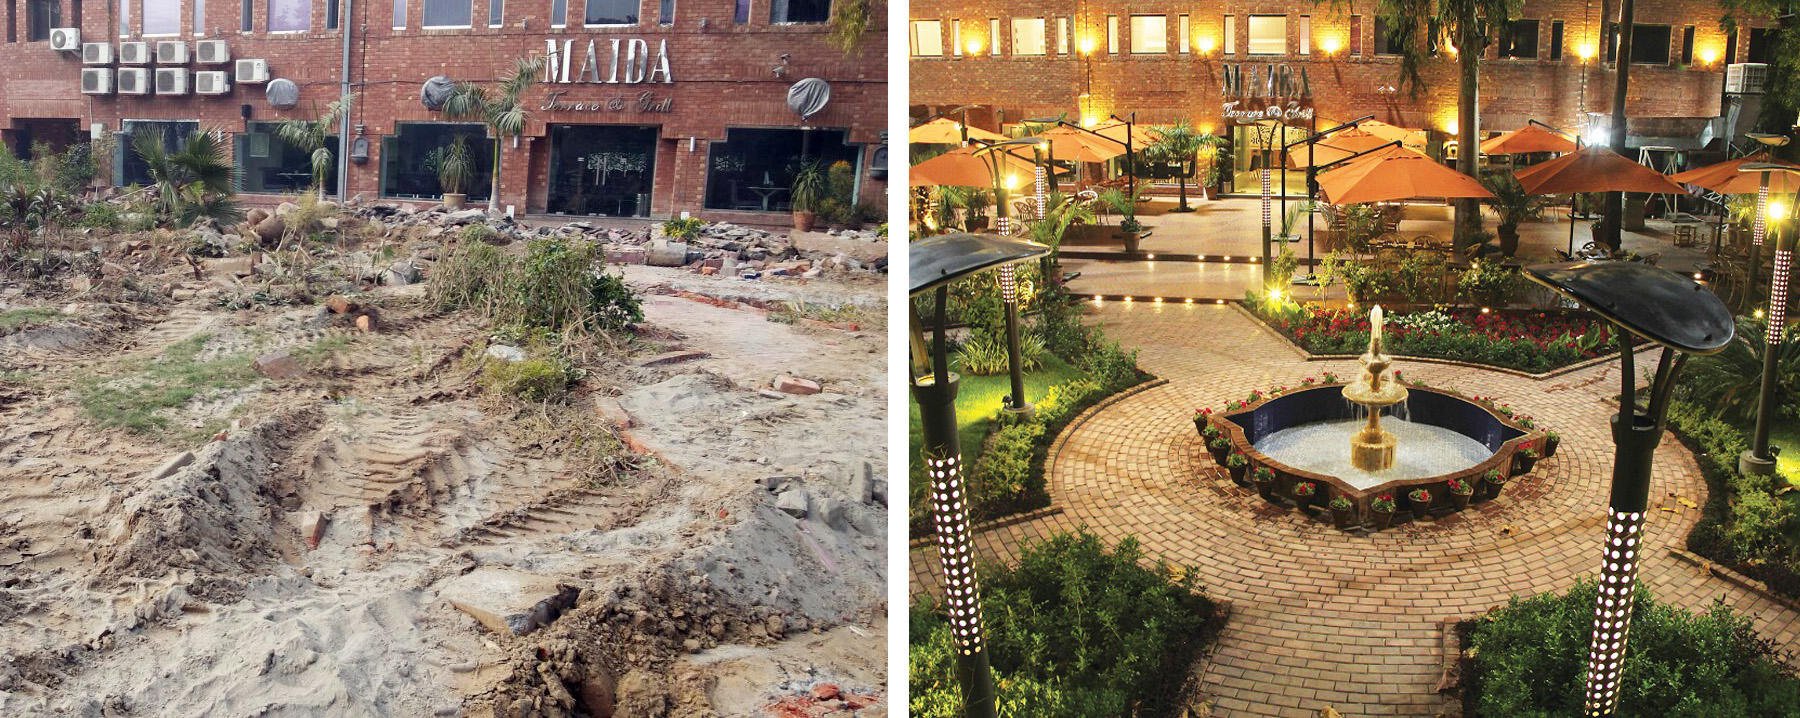 The open area of a popular food spot: (L) before and (R) after the anti encroachment drive.